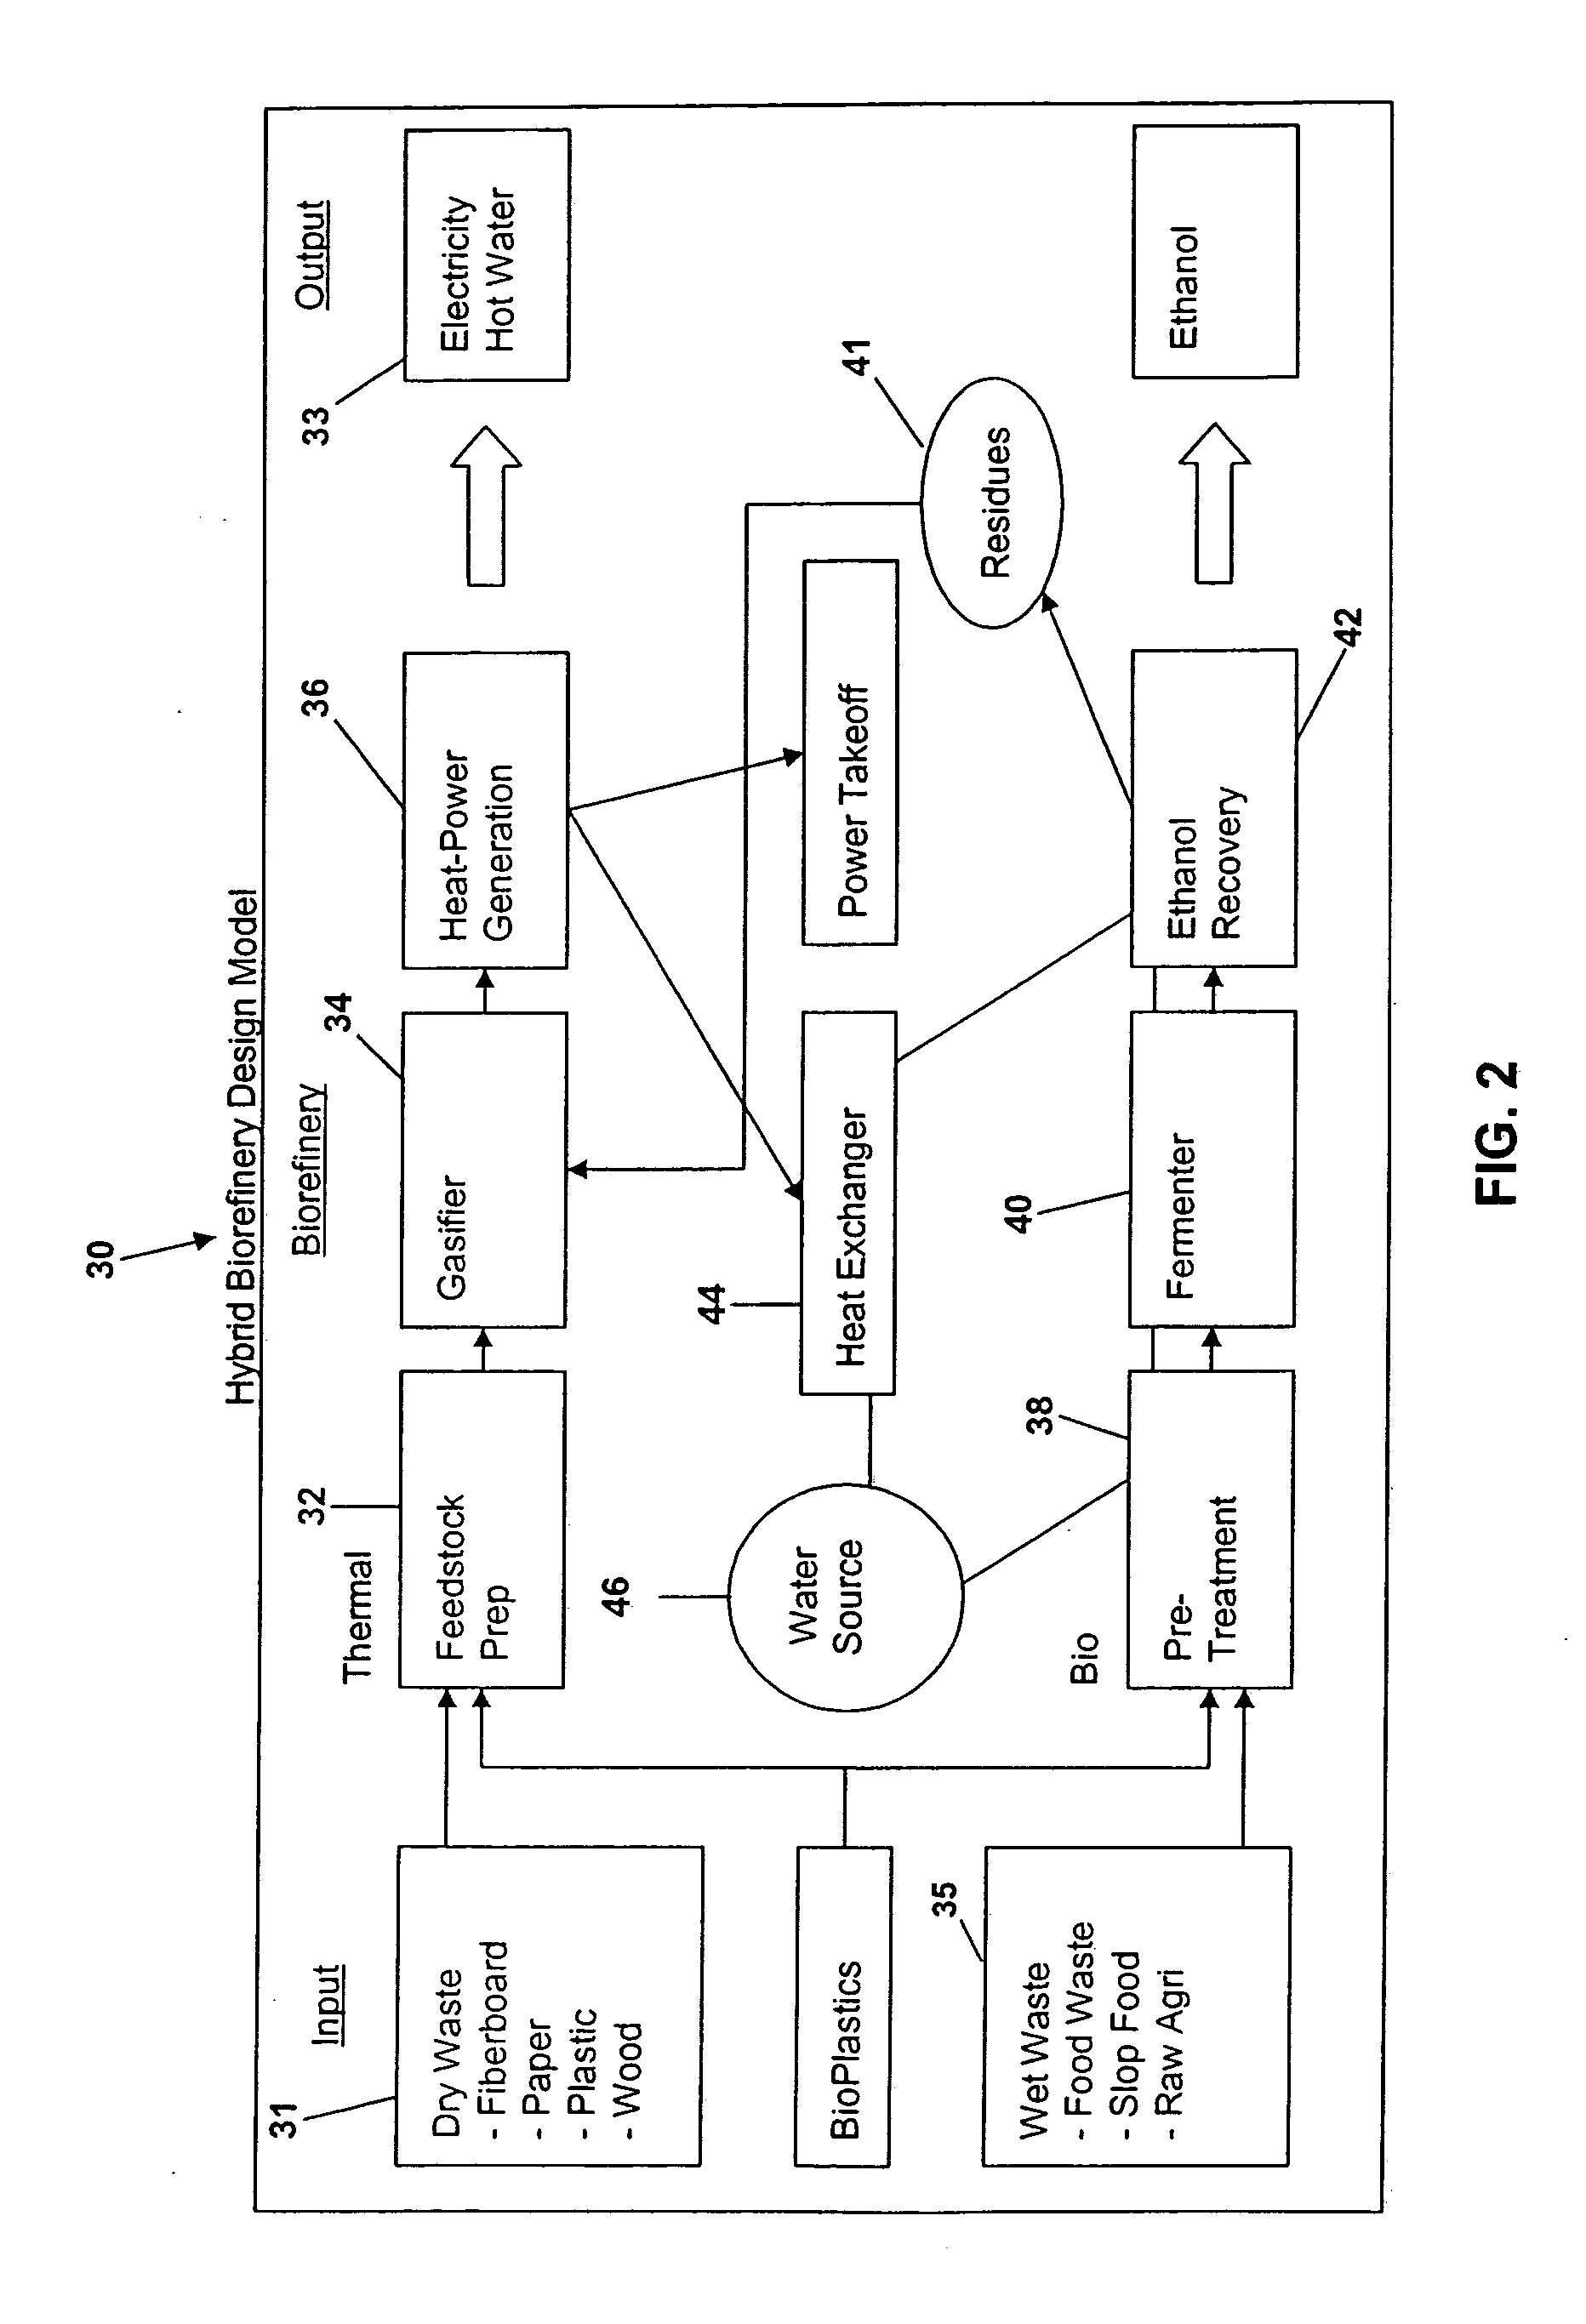 Integrated thermochemical and biocatalytic energy production system